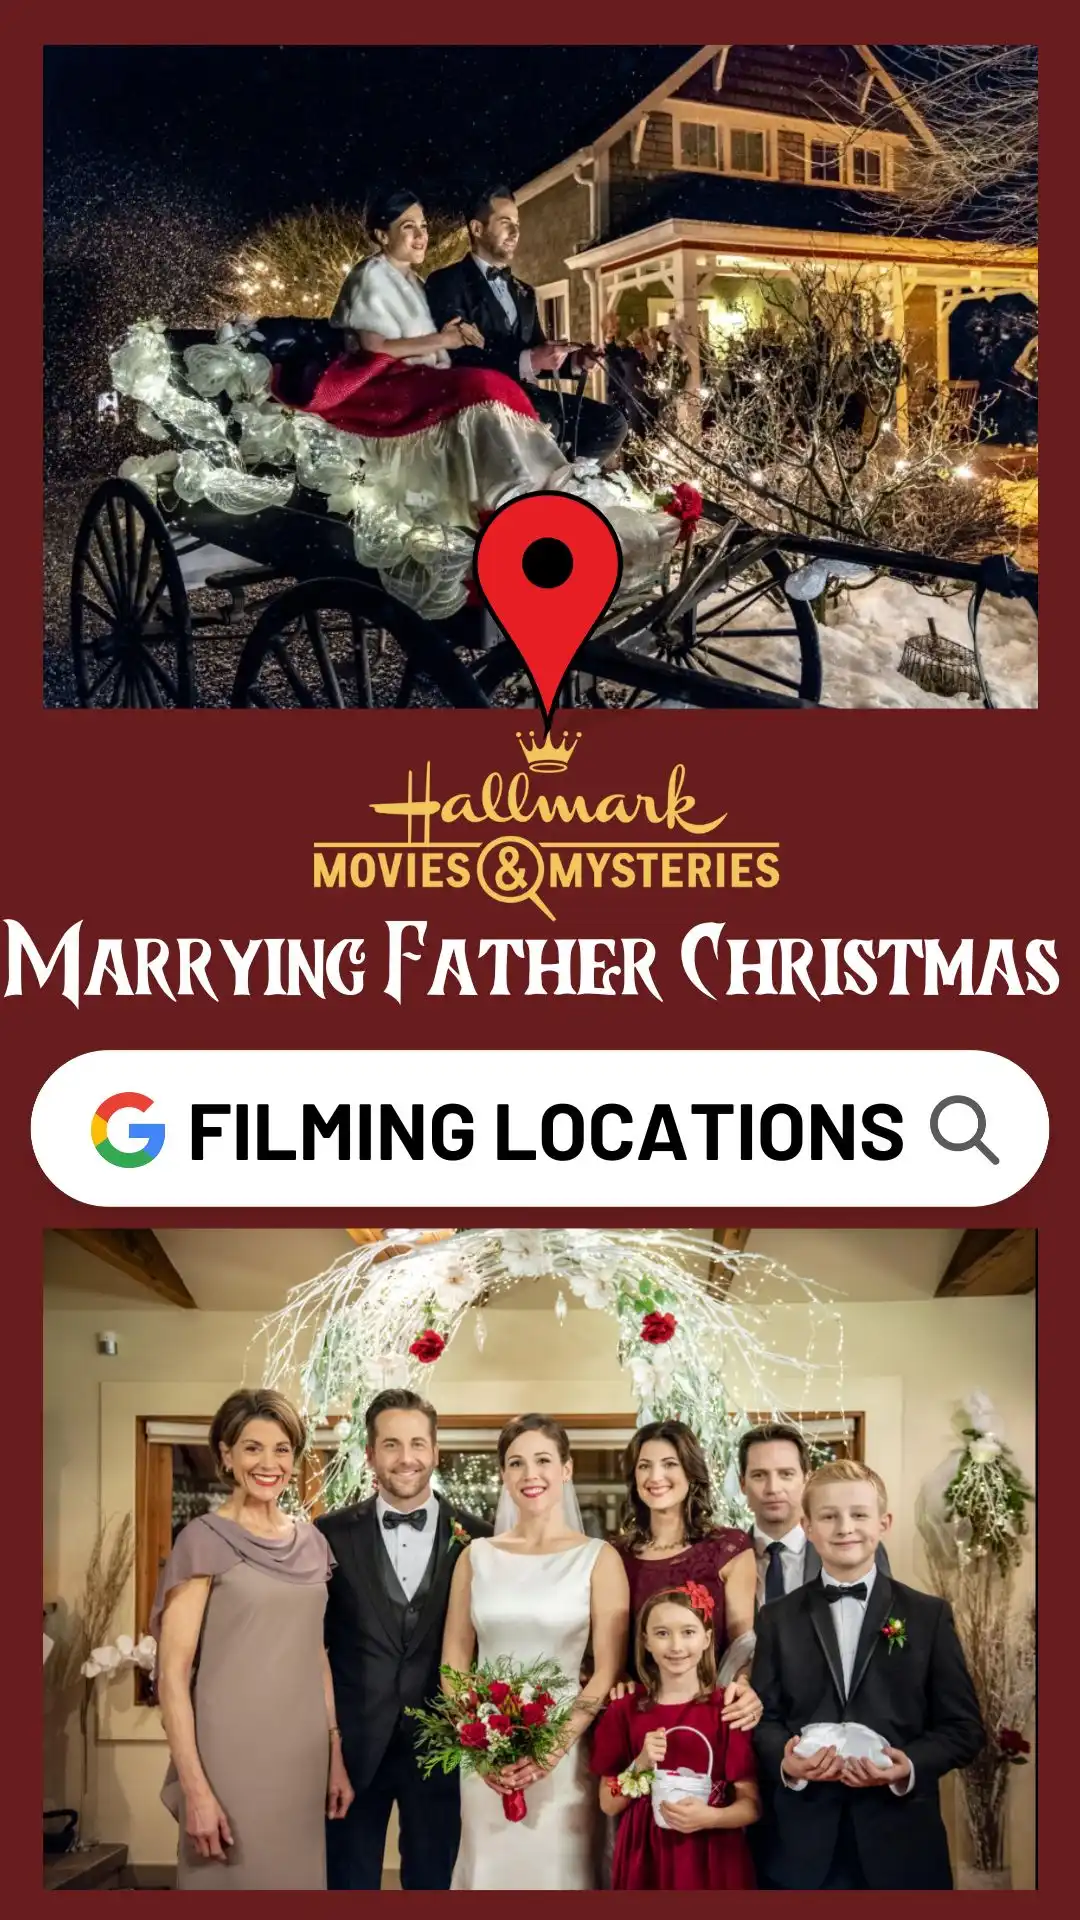 Marrying Father Christmas Filming Locations (1)